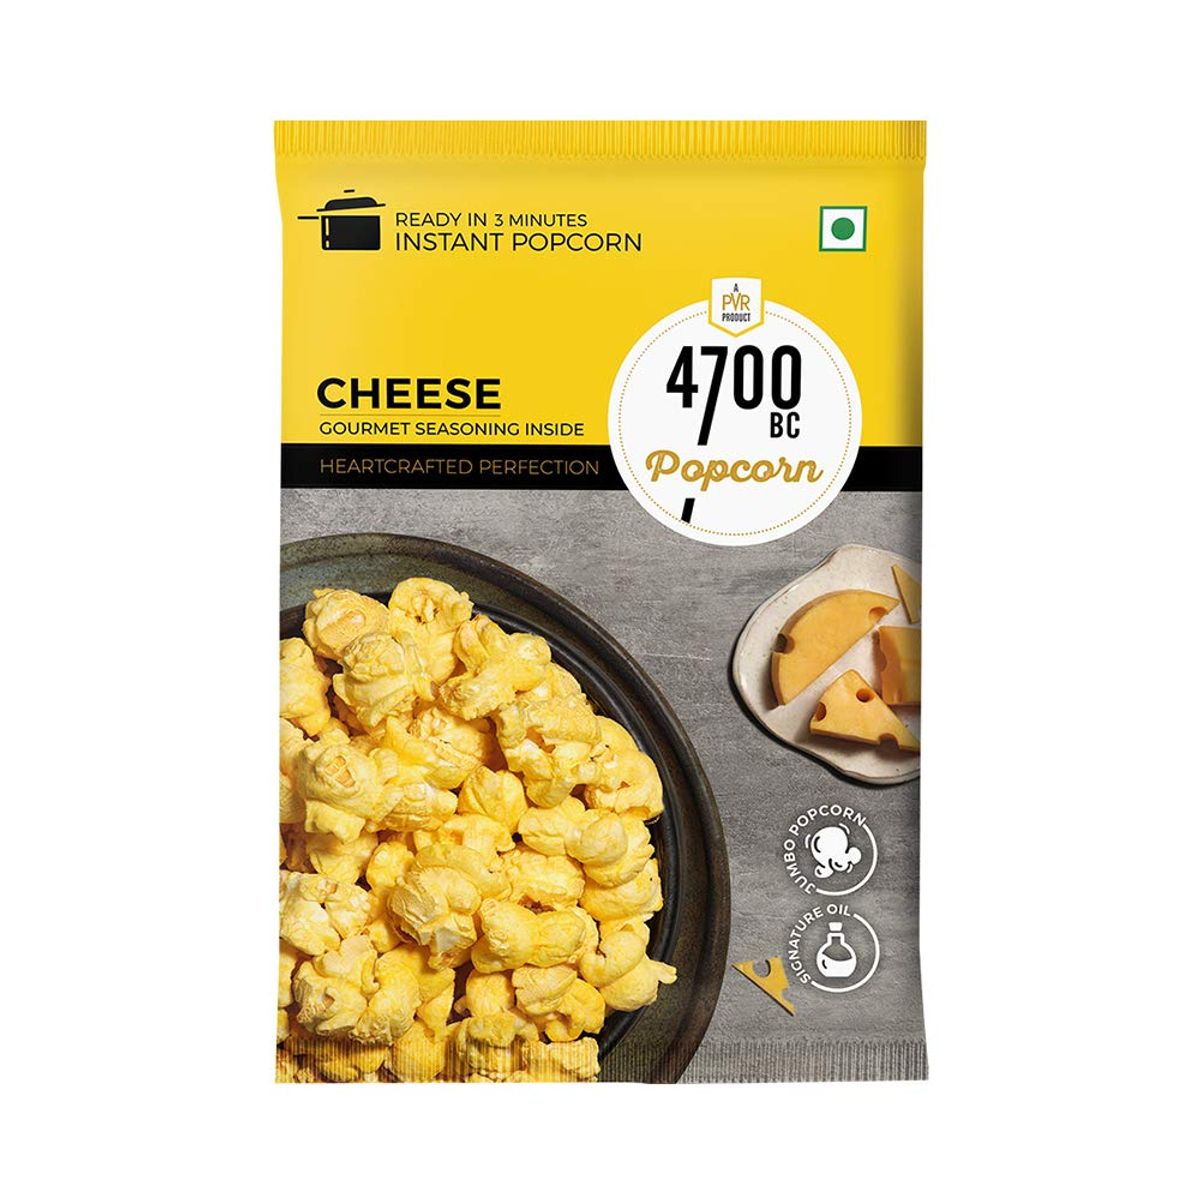 4700 BC Cheese Instant Popcorn Image